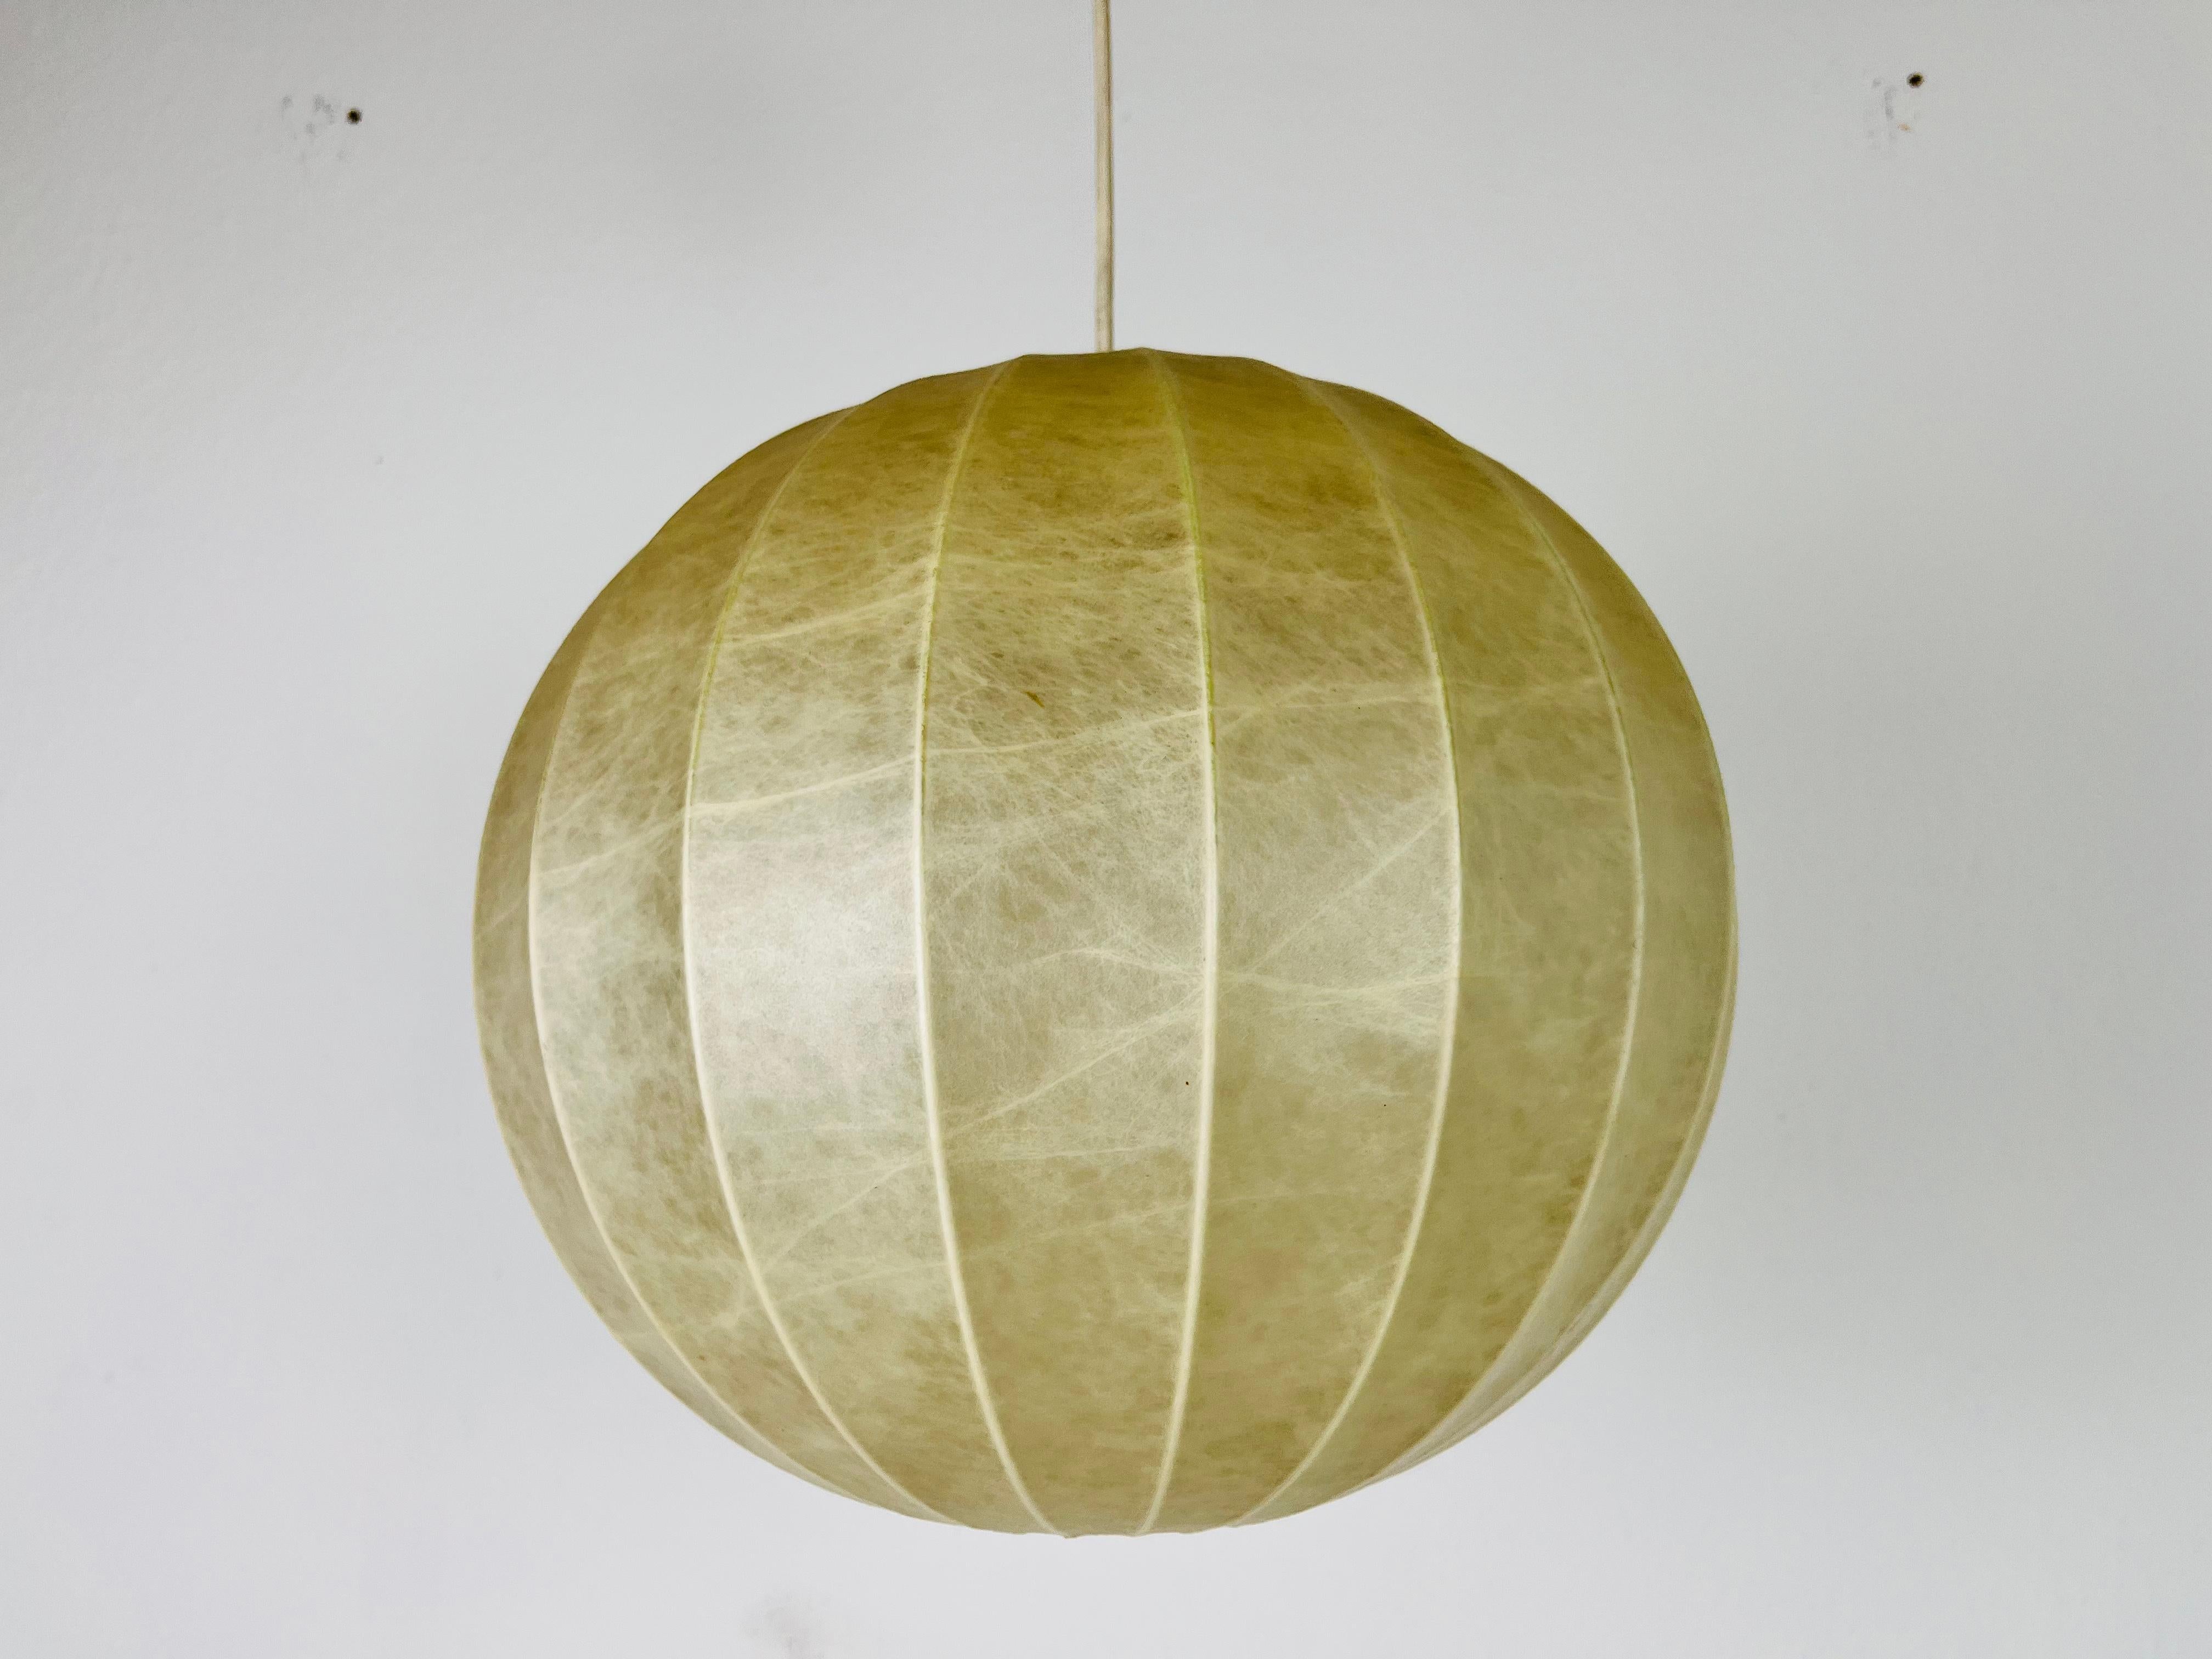 A cocoon hanging lamp made in Italy in the 1960s. It has a beautiful round design, which is similar to the lamps made by Castiglioni. 

Measures:
Height: 33-55 cm
Diameter: 35 cm

The light requires one E27 light bulb. Works with both 120/220V. Very